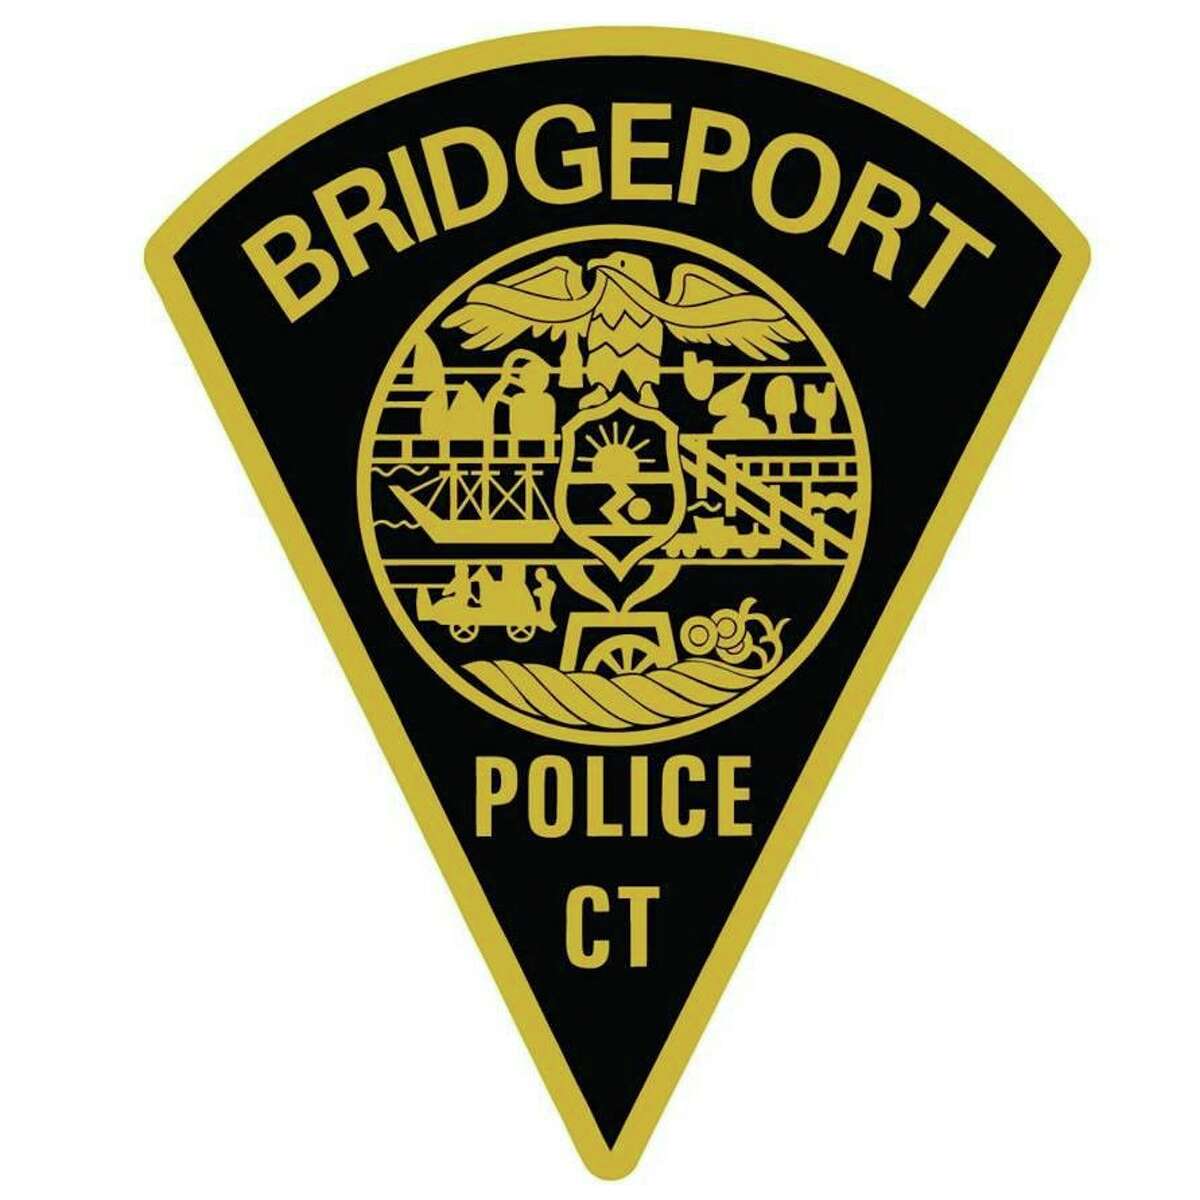 Police said they were contacted at around 3 p.m. on Fridaym Sept. 18, 2020 that a stab would victim was brought to Bridgeport Hospital.